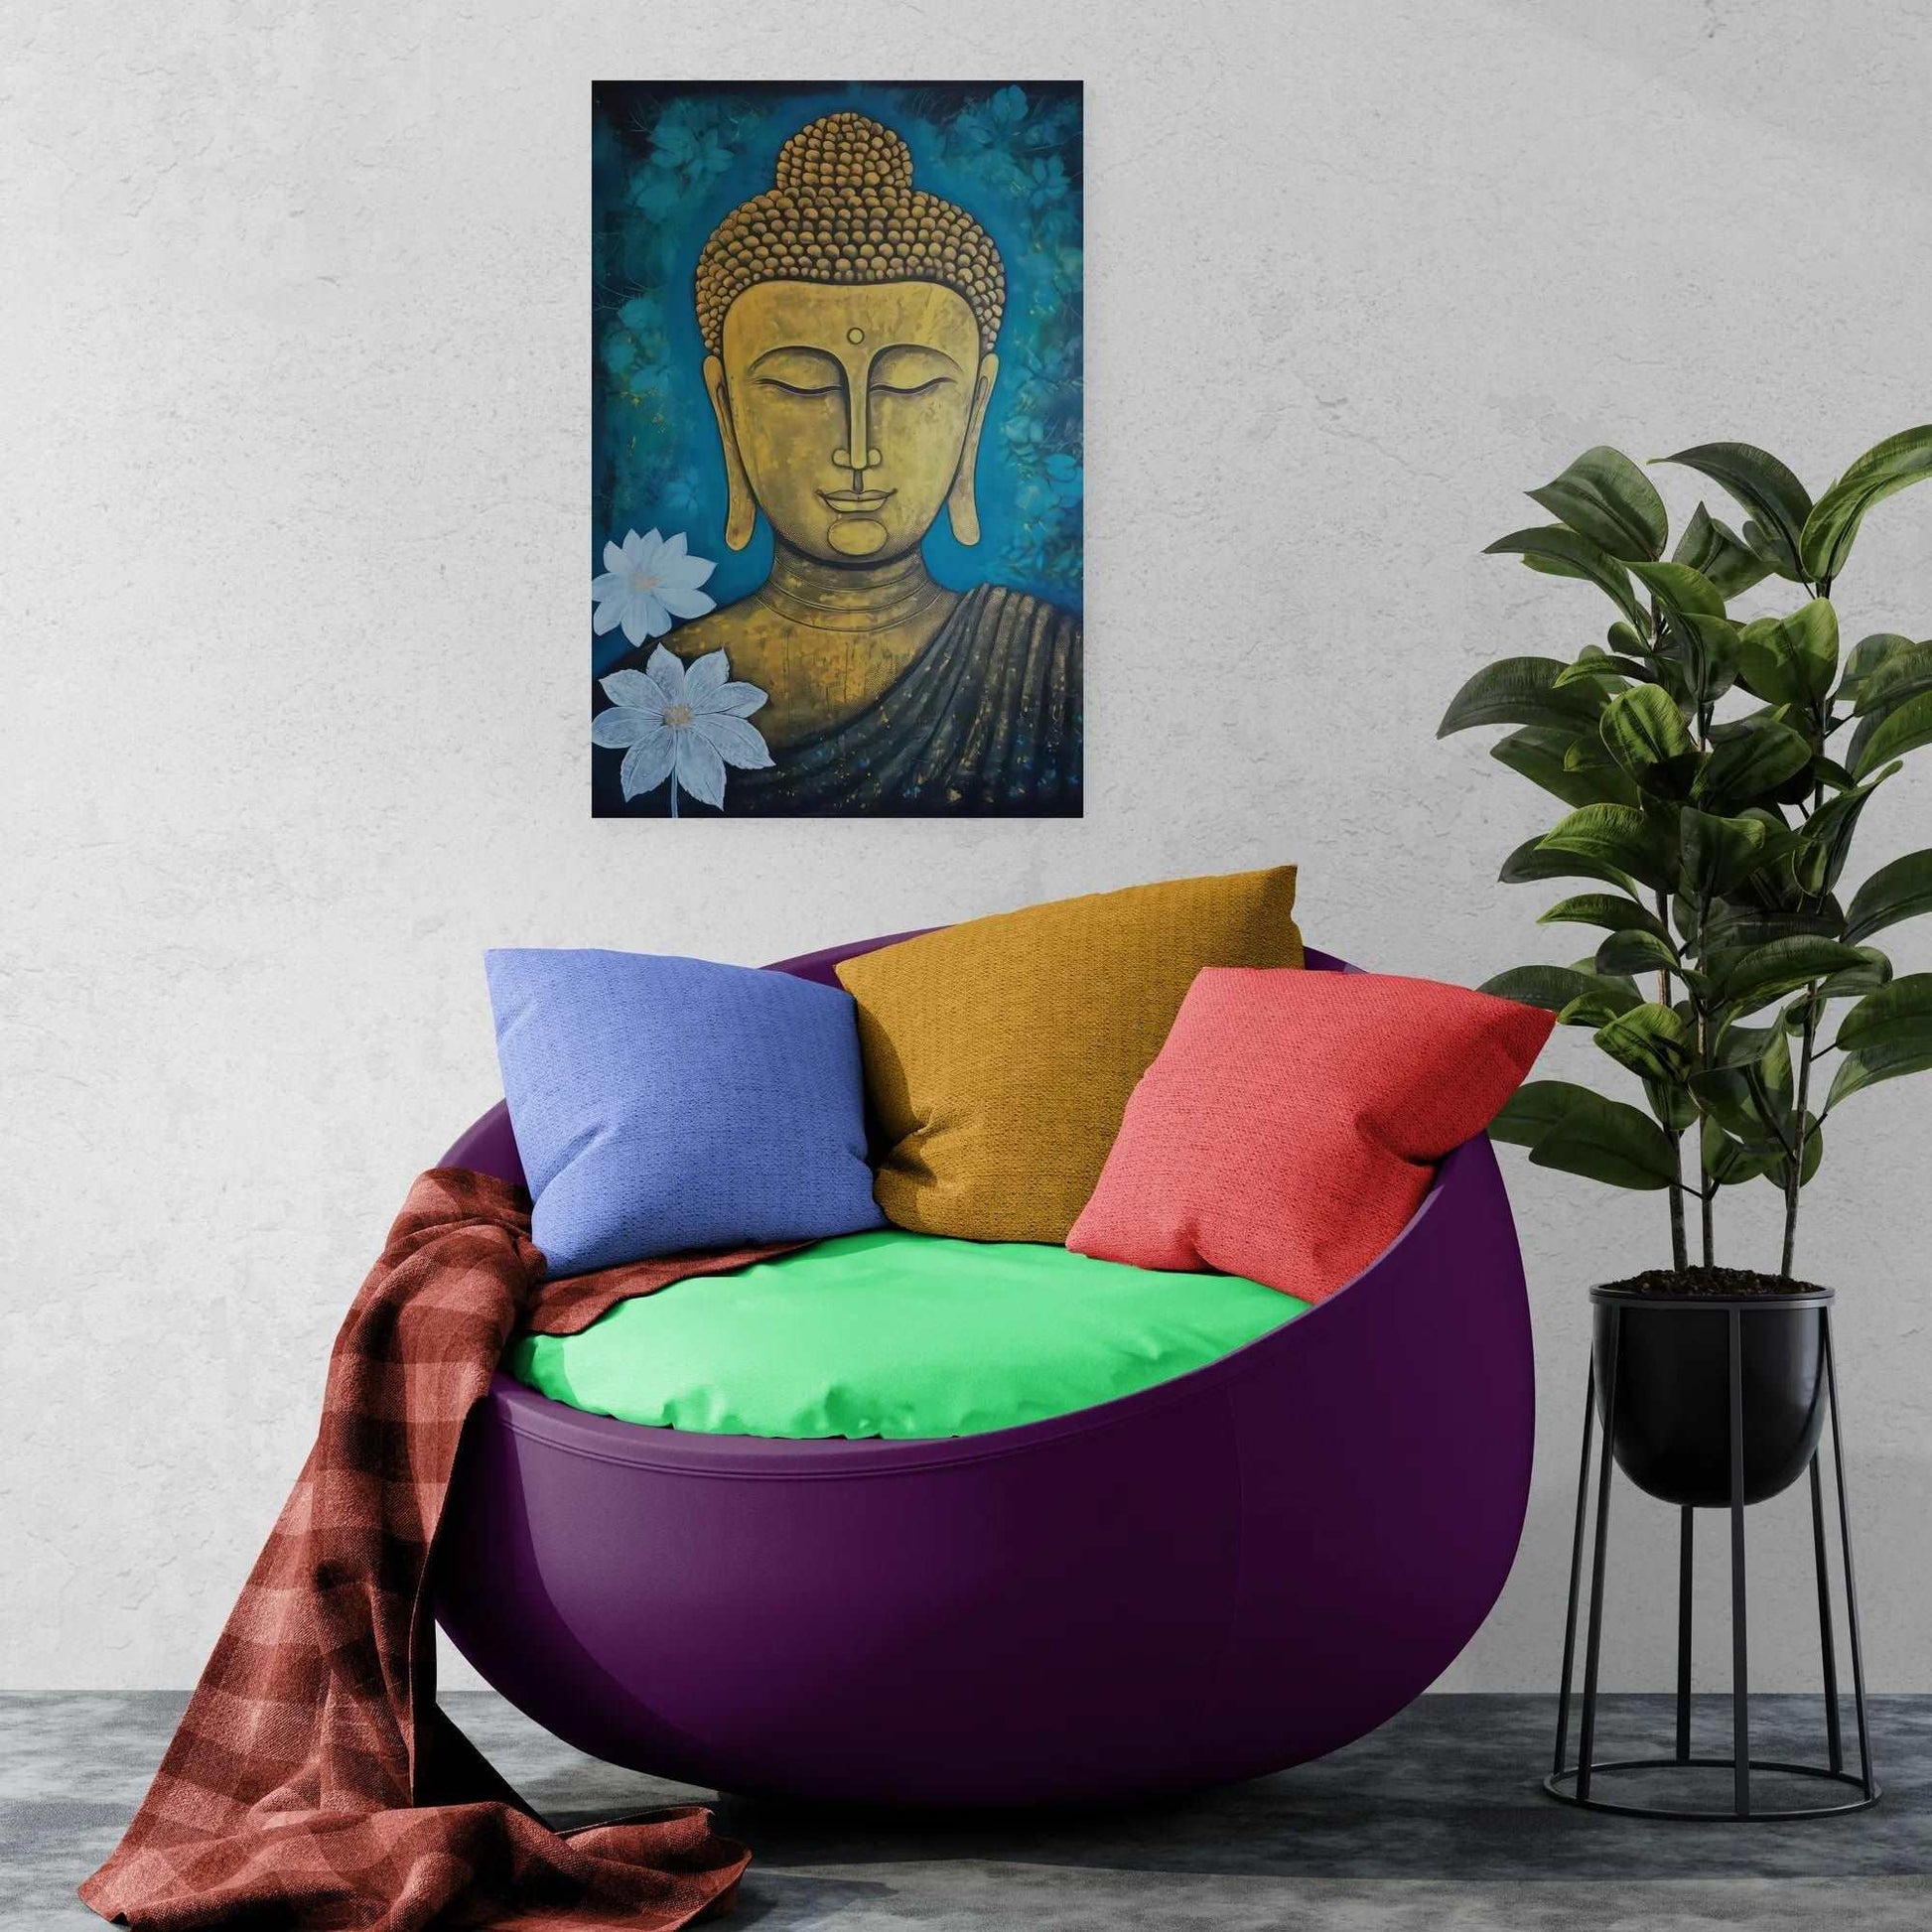 Vibrant golden Buddha canvas with teal flowers, displayed above a colorful modern chair with cushions and a potted plant